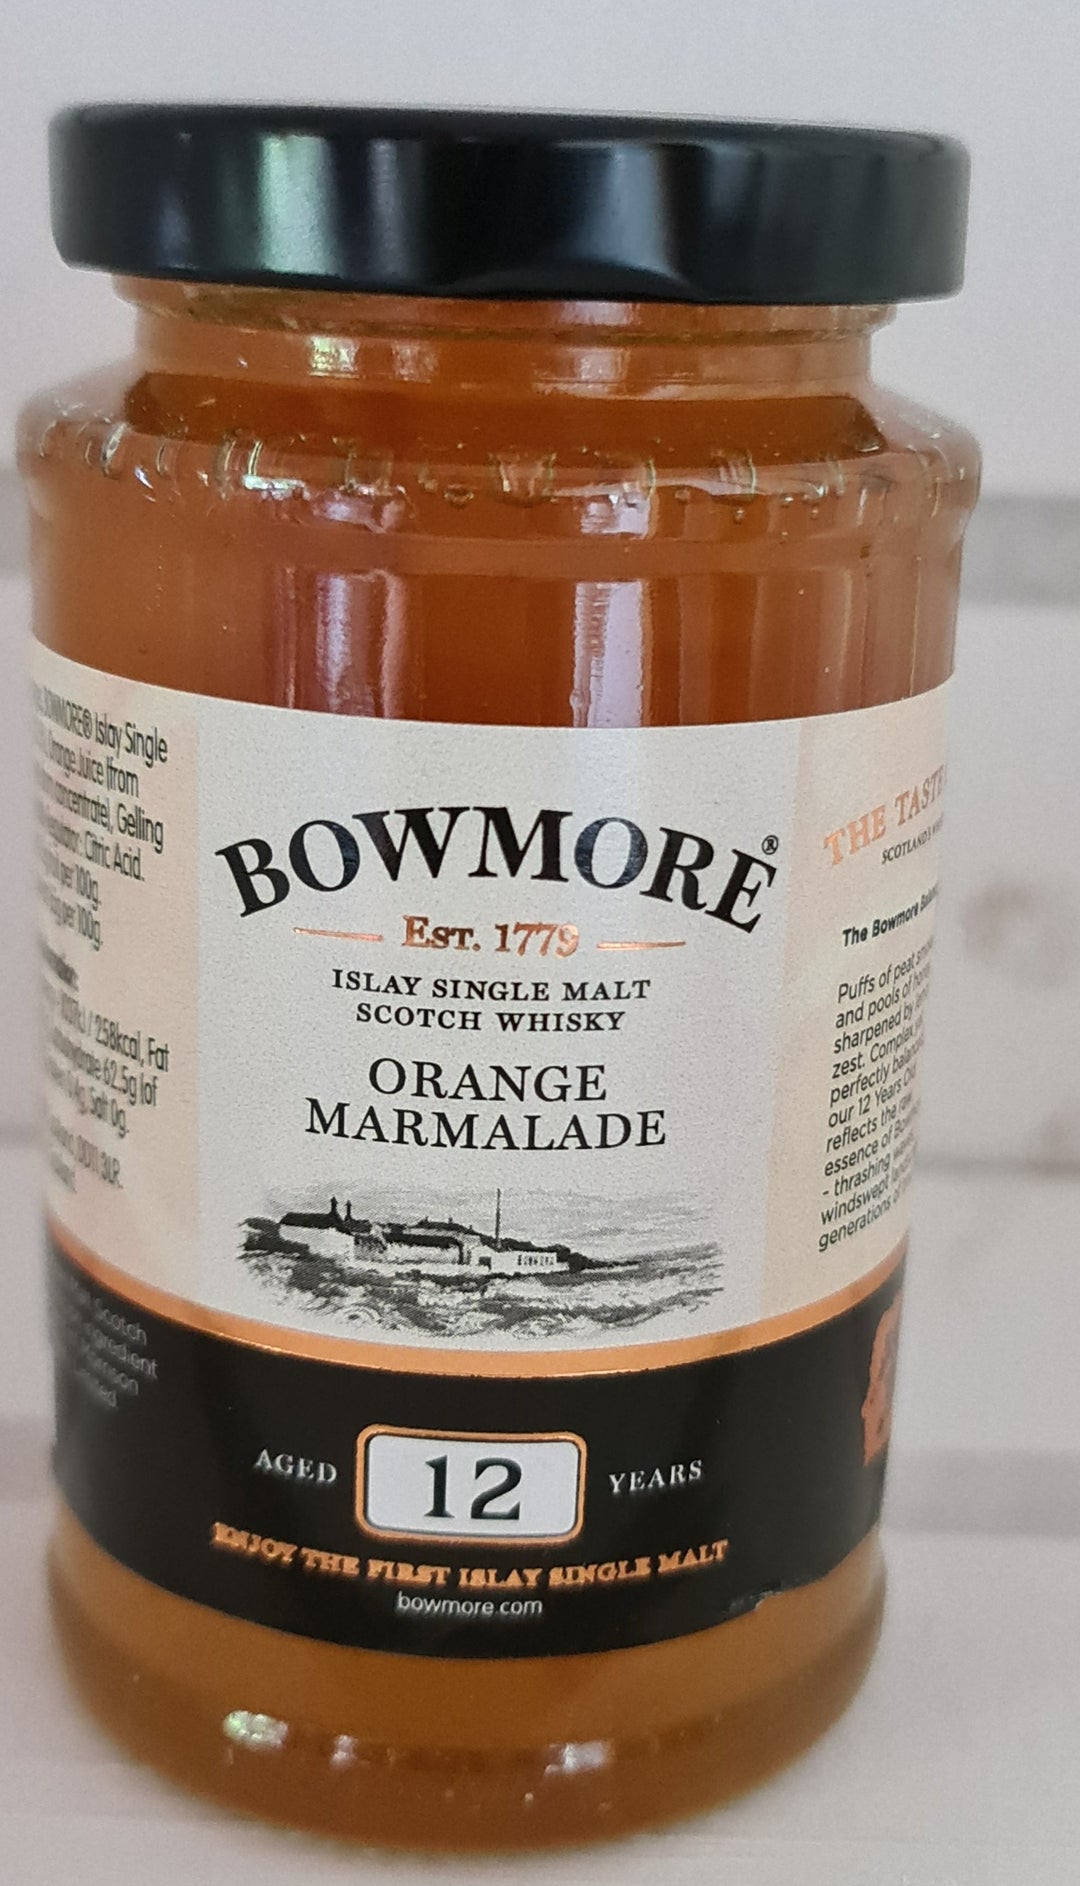 Orange Marmalade with Bowmore Whisky, 235 gr Glas - British Moments